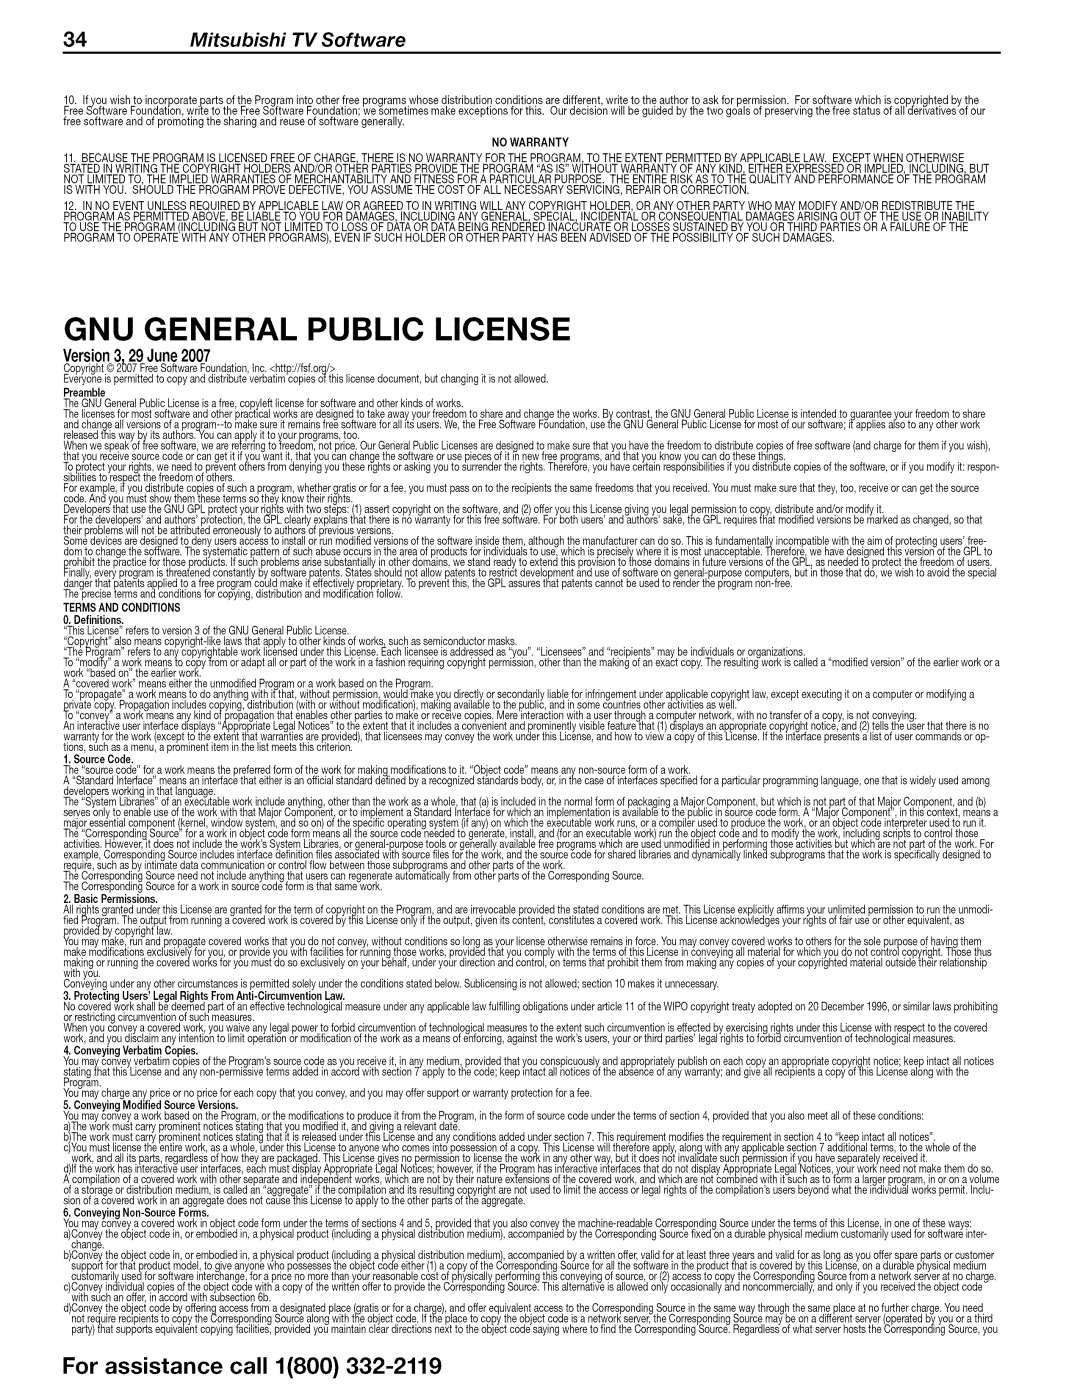 Mitsubishi Electronics WD-73C1 Gnu General Public License, Version3,29 June2007, For assistance call 1800, O,Definitions 